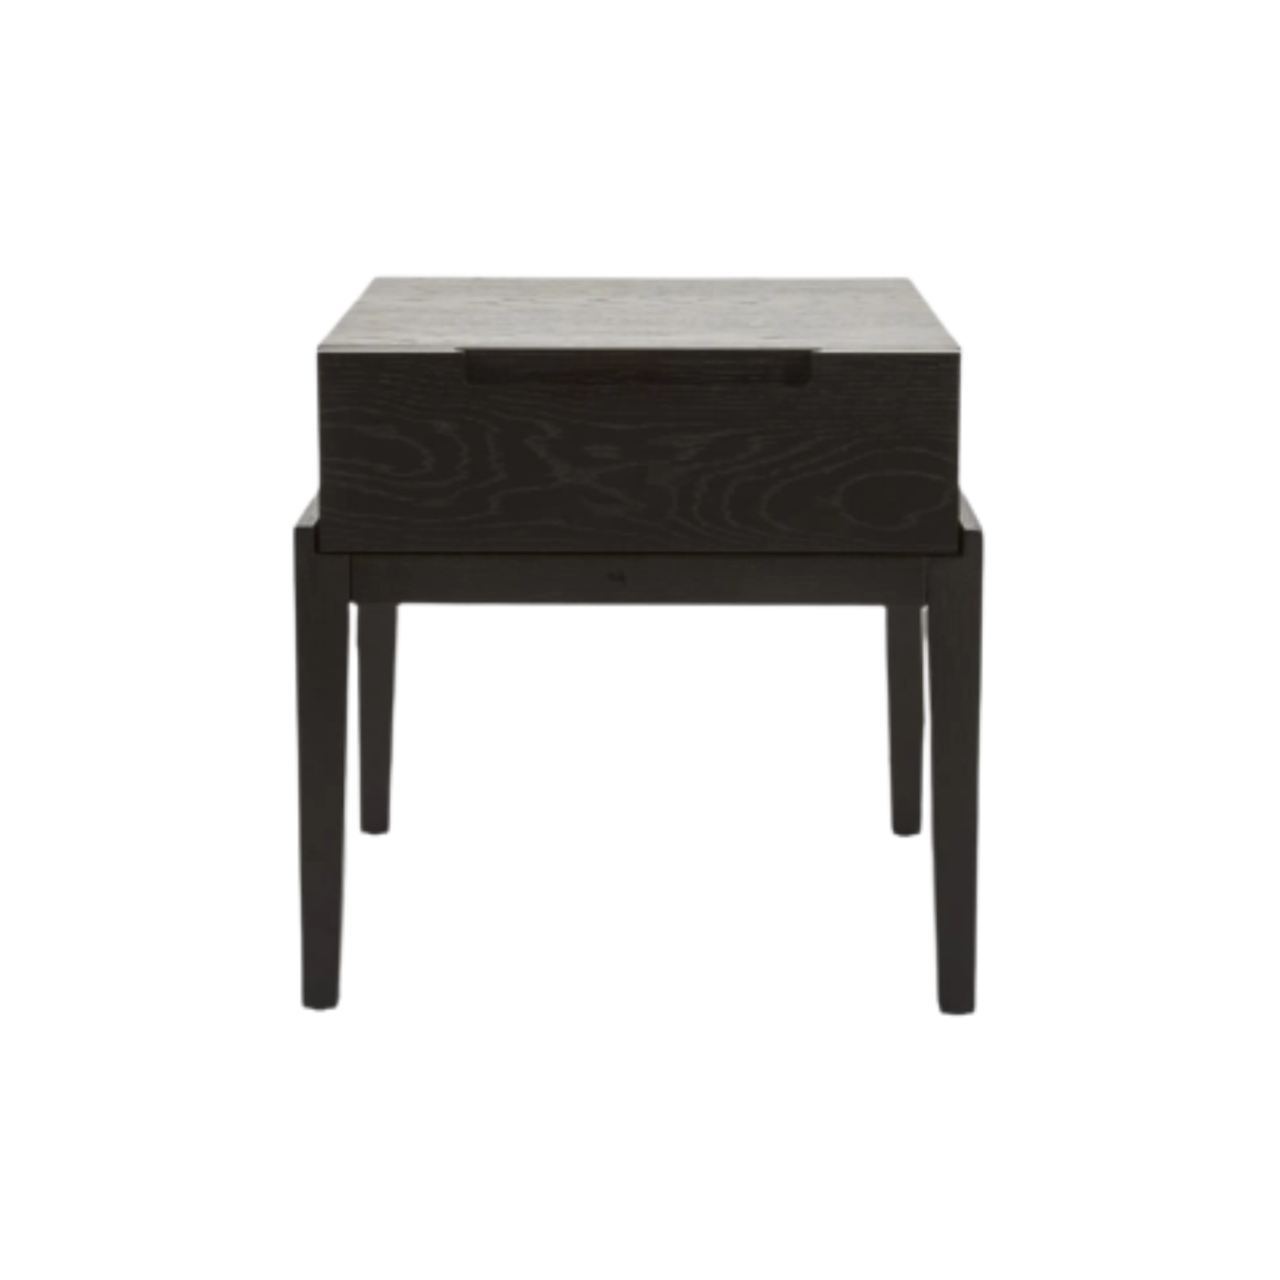 Modern wedge bedside table with one drawer